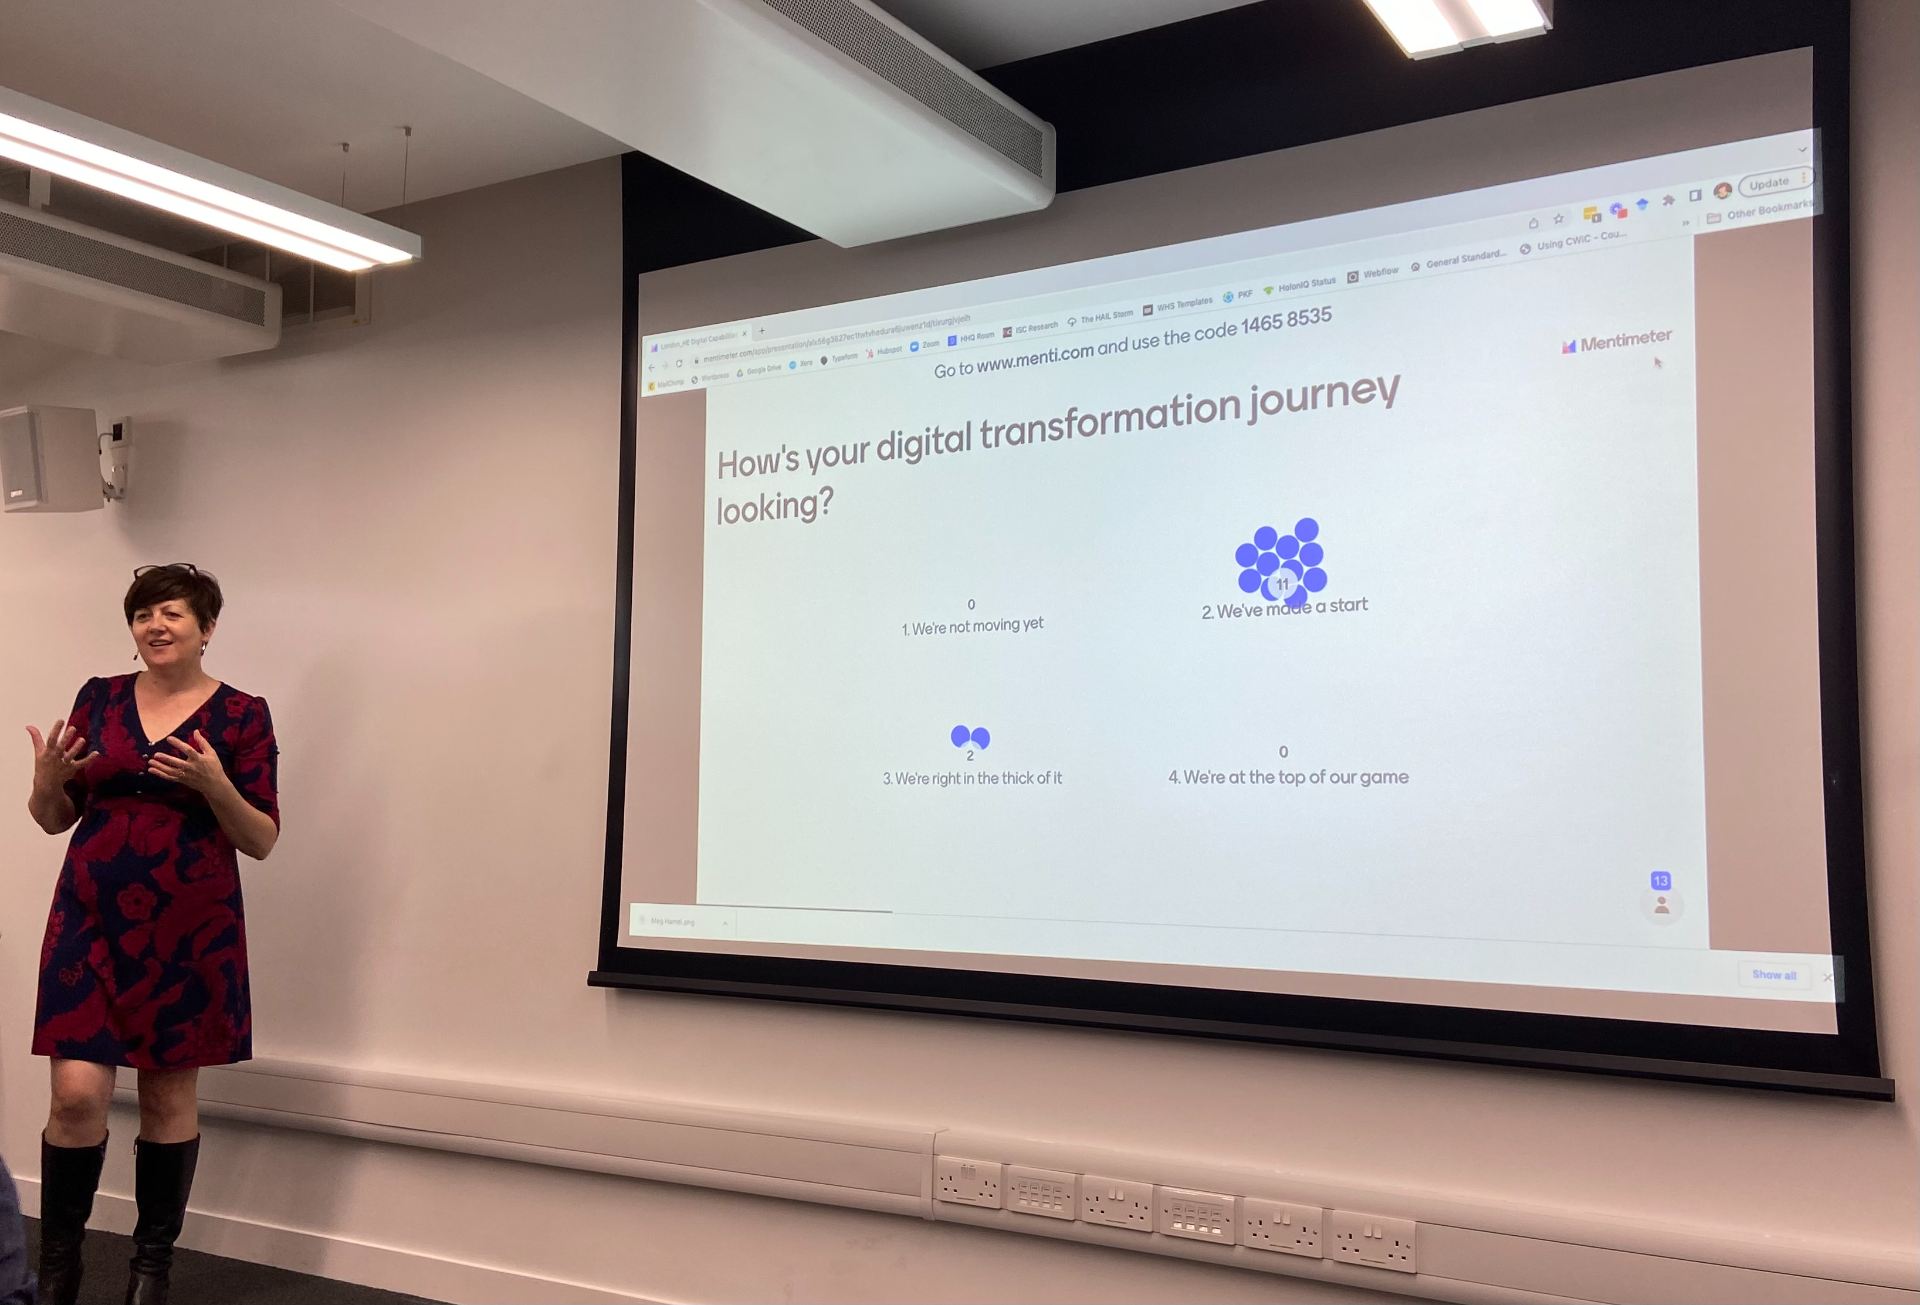 Maria Spies from HolonIQ standing to the left of a screen displaying a poll about where participants are on their digital transformation journey. The poll indicates that the majority have just started, with a small number 'in the thick of it'.